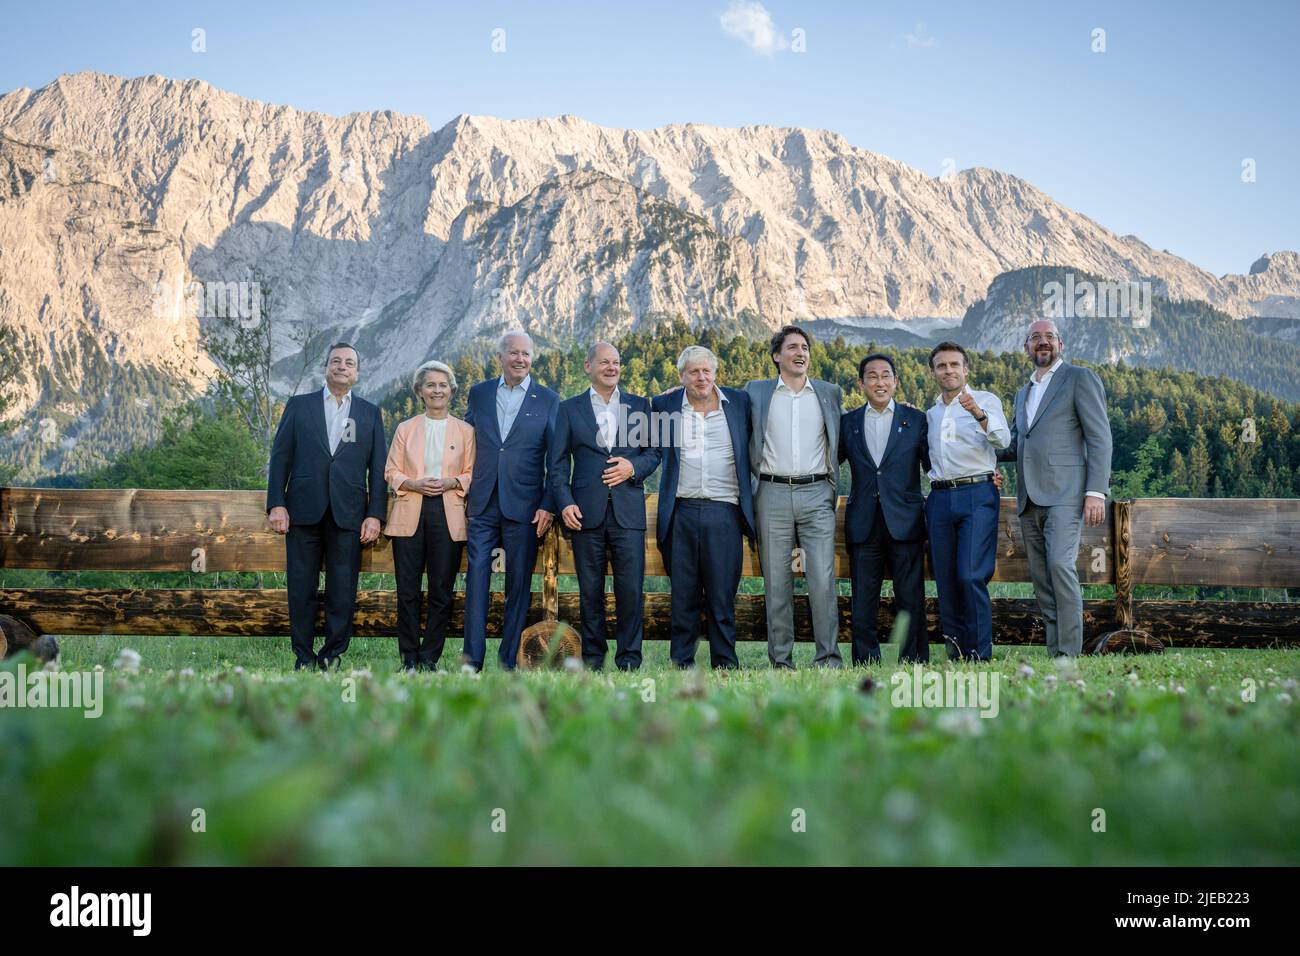 26 June 2022, Bavaria, Elmau: The leaders lined up for an informal group photo at the 'Merkel - Obama' bench after dinner at the G7 meeting at Schloss Elmau. Mario Draghi, Prime Minister of Italy, Ursula von der Leyen, EU Commission President, US President Joe Biden, German Chancellor Olaf Scholz (SPD), Boris Johnson, Prime Minister of Great Britain, Justin Trudeau, Prime Minister of Canada, Fumio Kishida, Prime Minister of Japan, Emmanuel Macron, President of France, Charles Michel, EU Council President. Germany is hosting the G7 summit of economically strong democracies. On the first day of Stock Photo